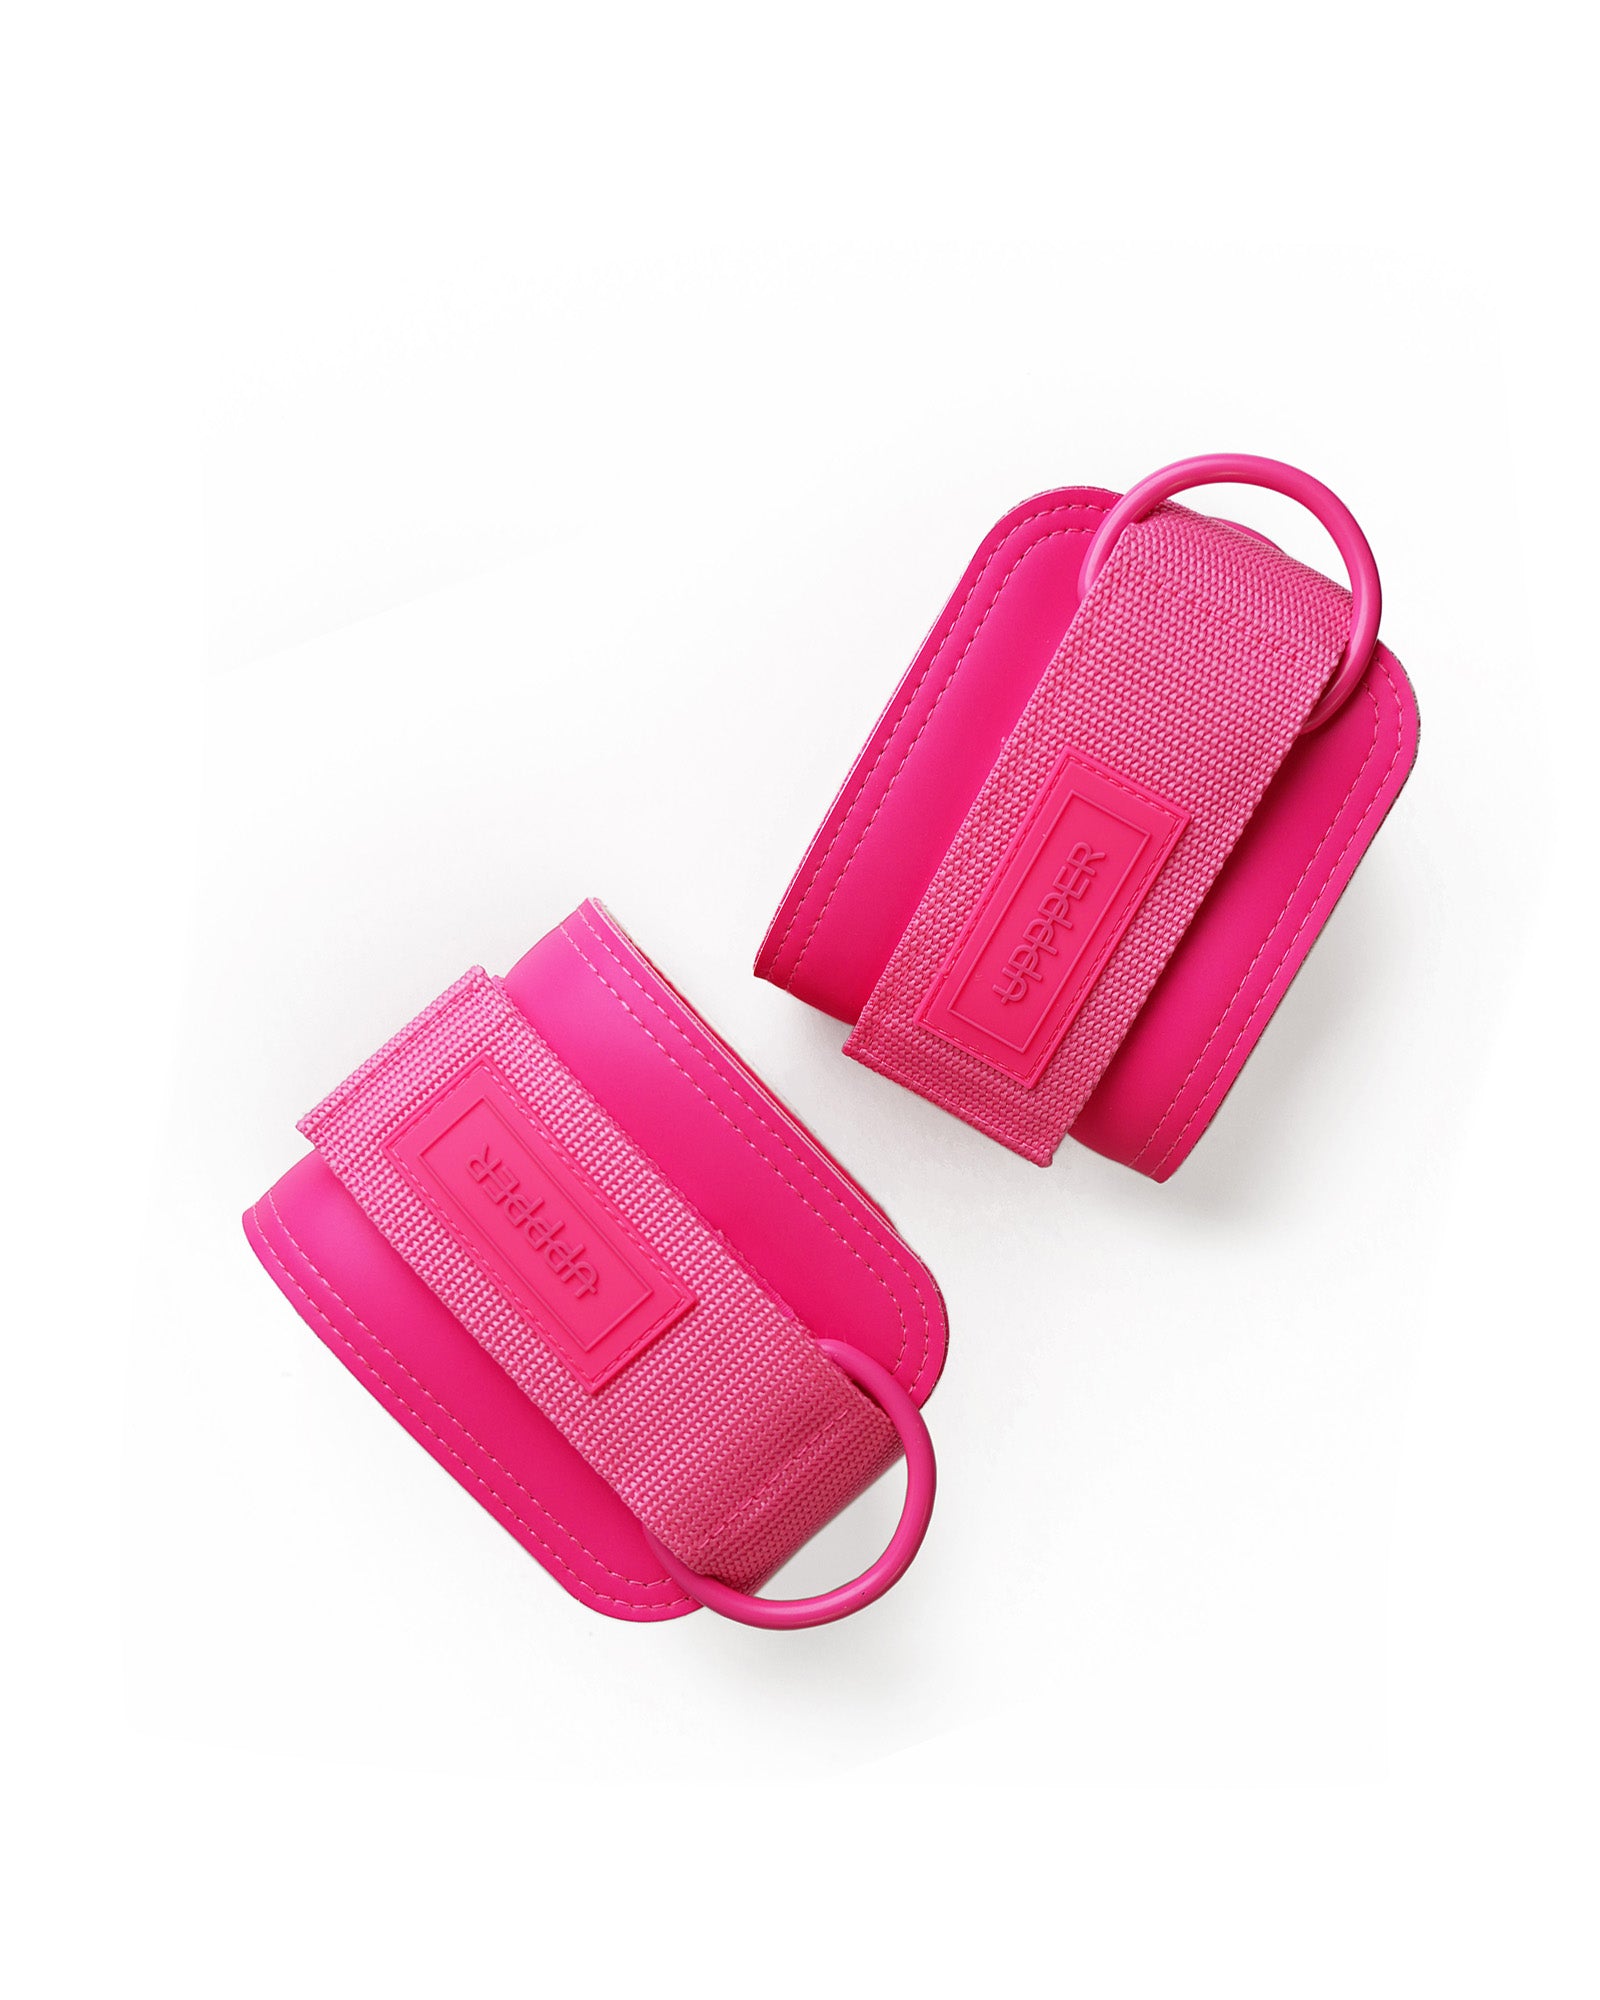 Neon Pink Lifting Straps – UPPPER Gear